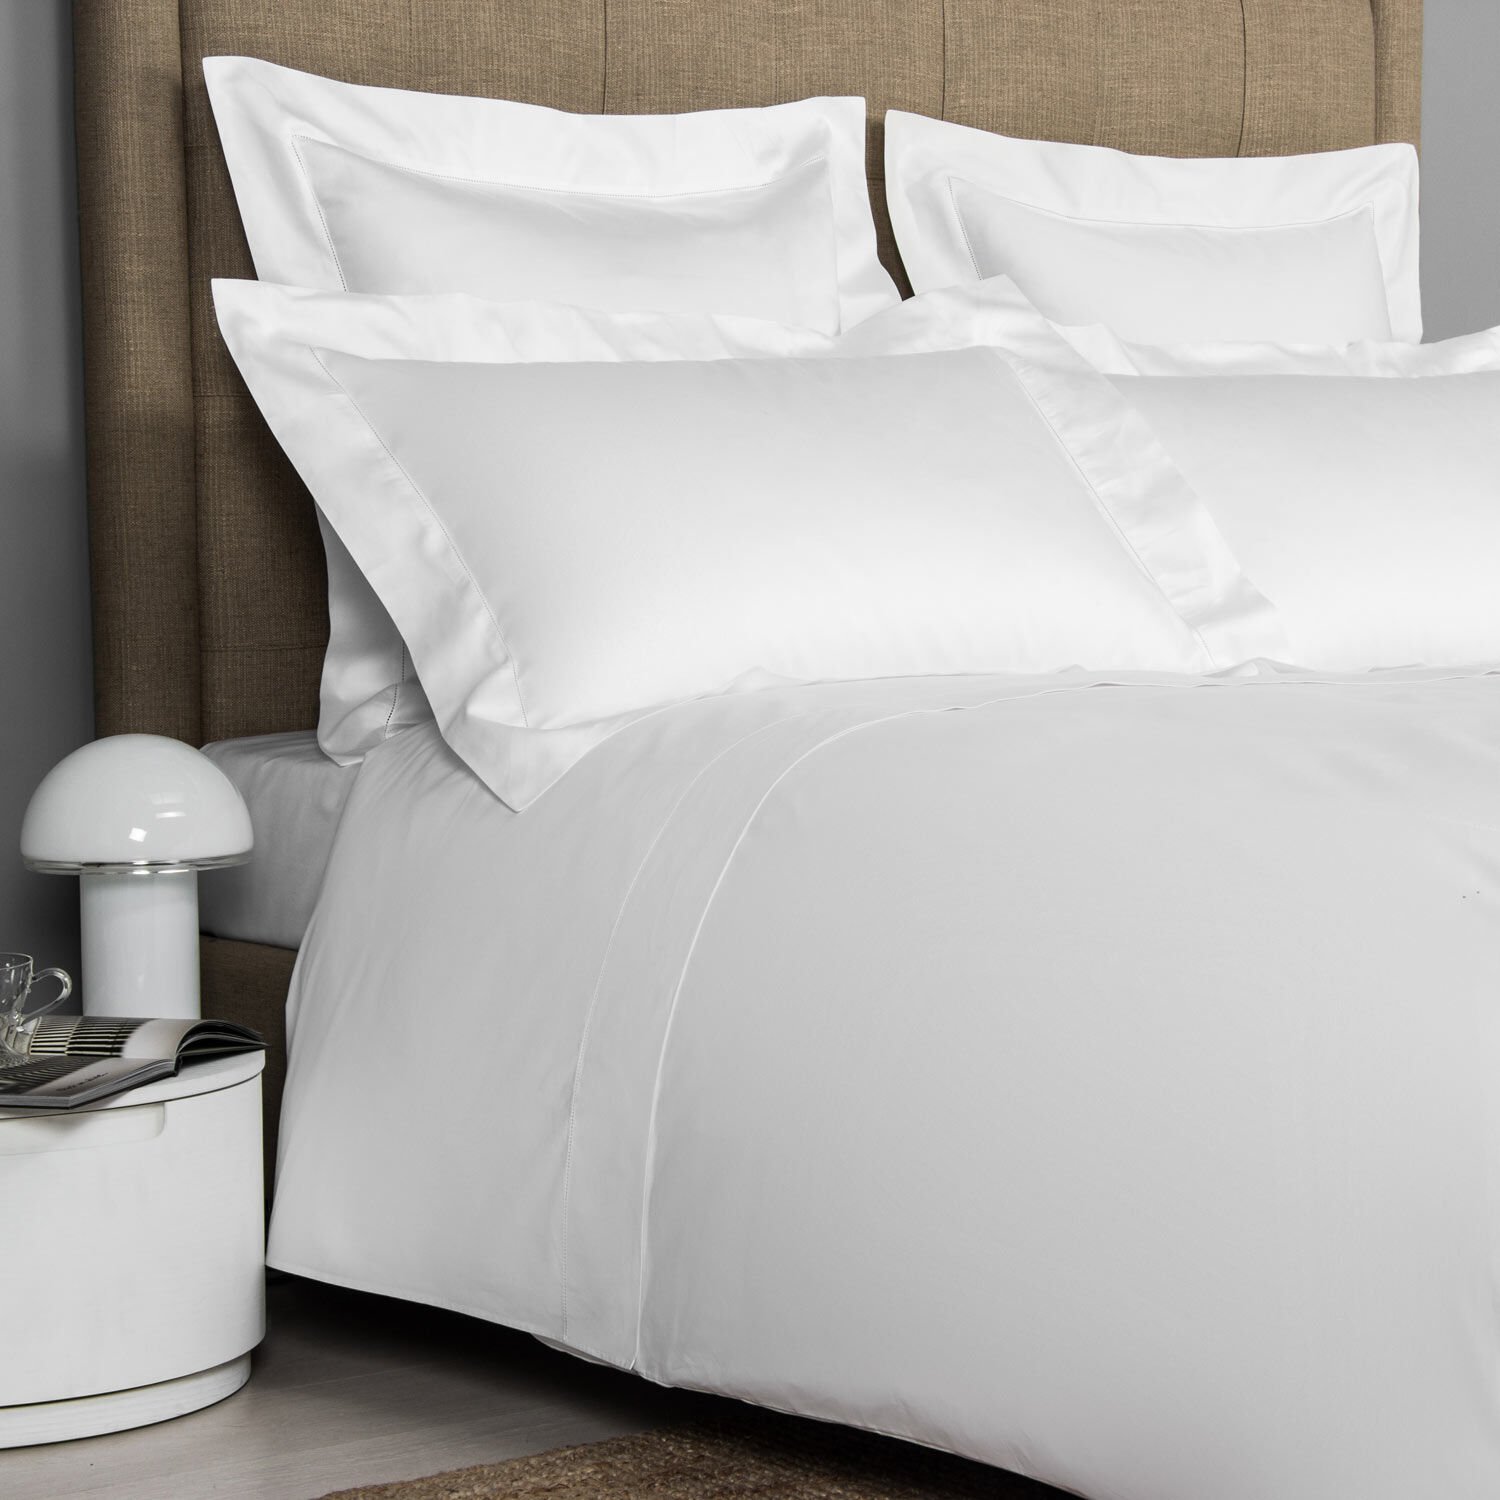 FRETTE Lux Percale QUEEN Sheet Set 100 % Cotton In White NEW Luxurious 